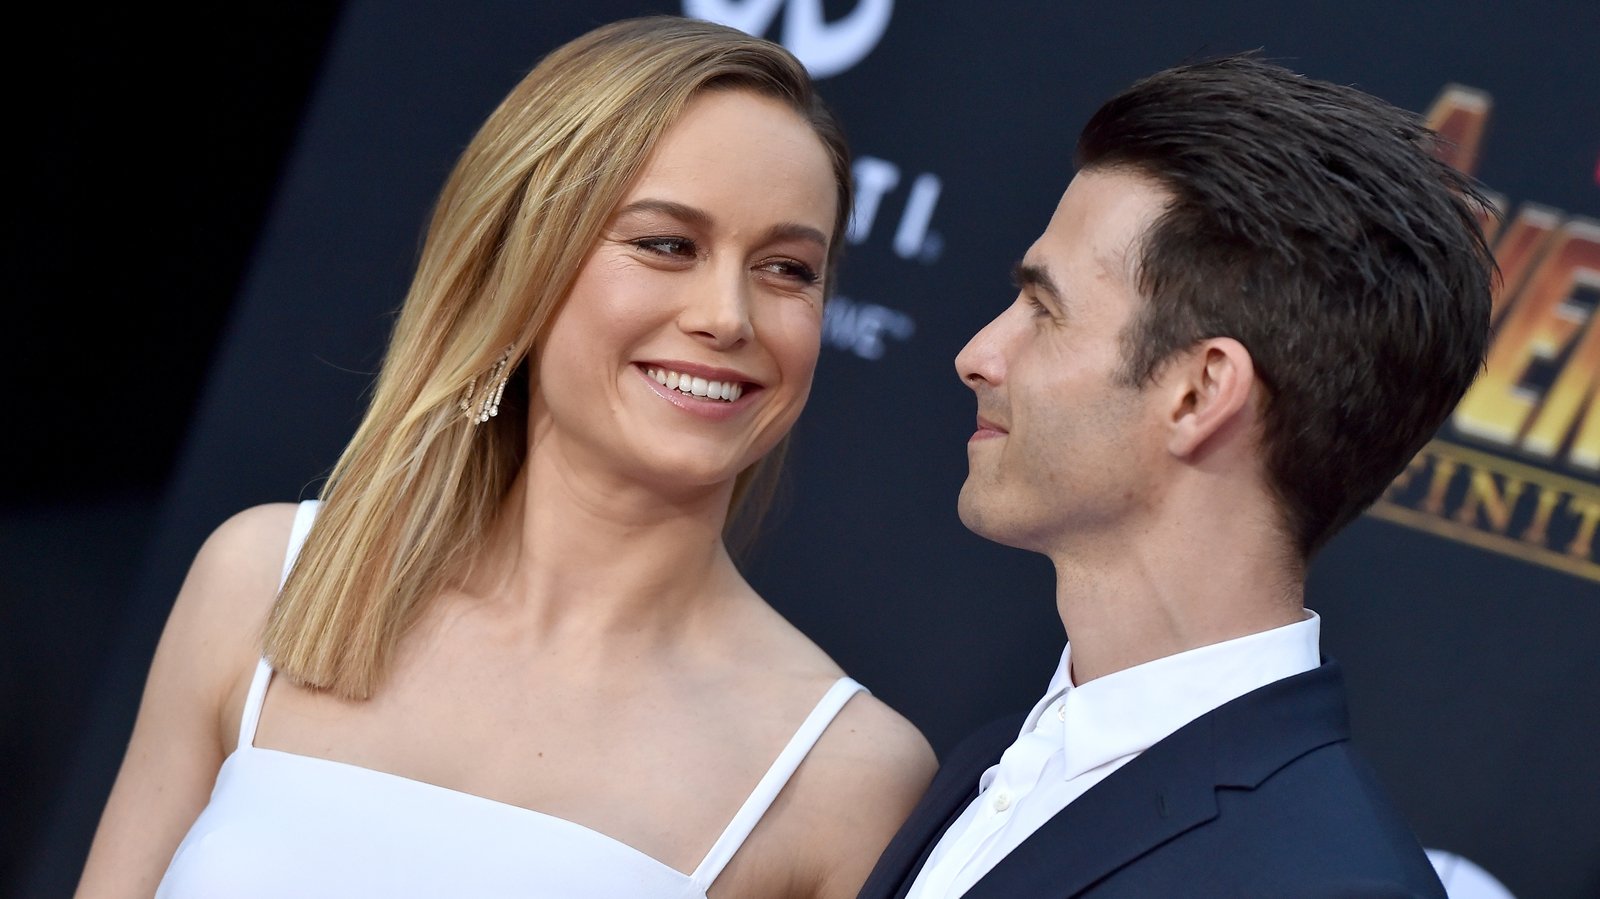 Brie Larson splits from fiancé of two years